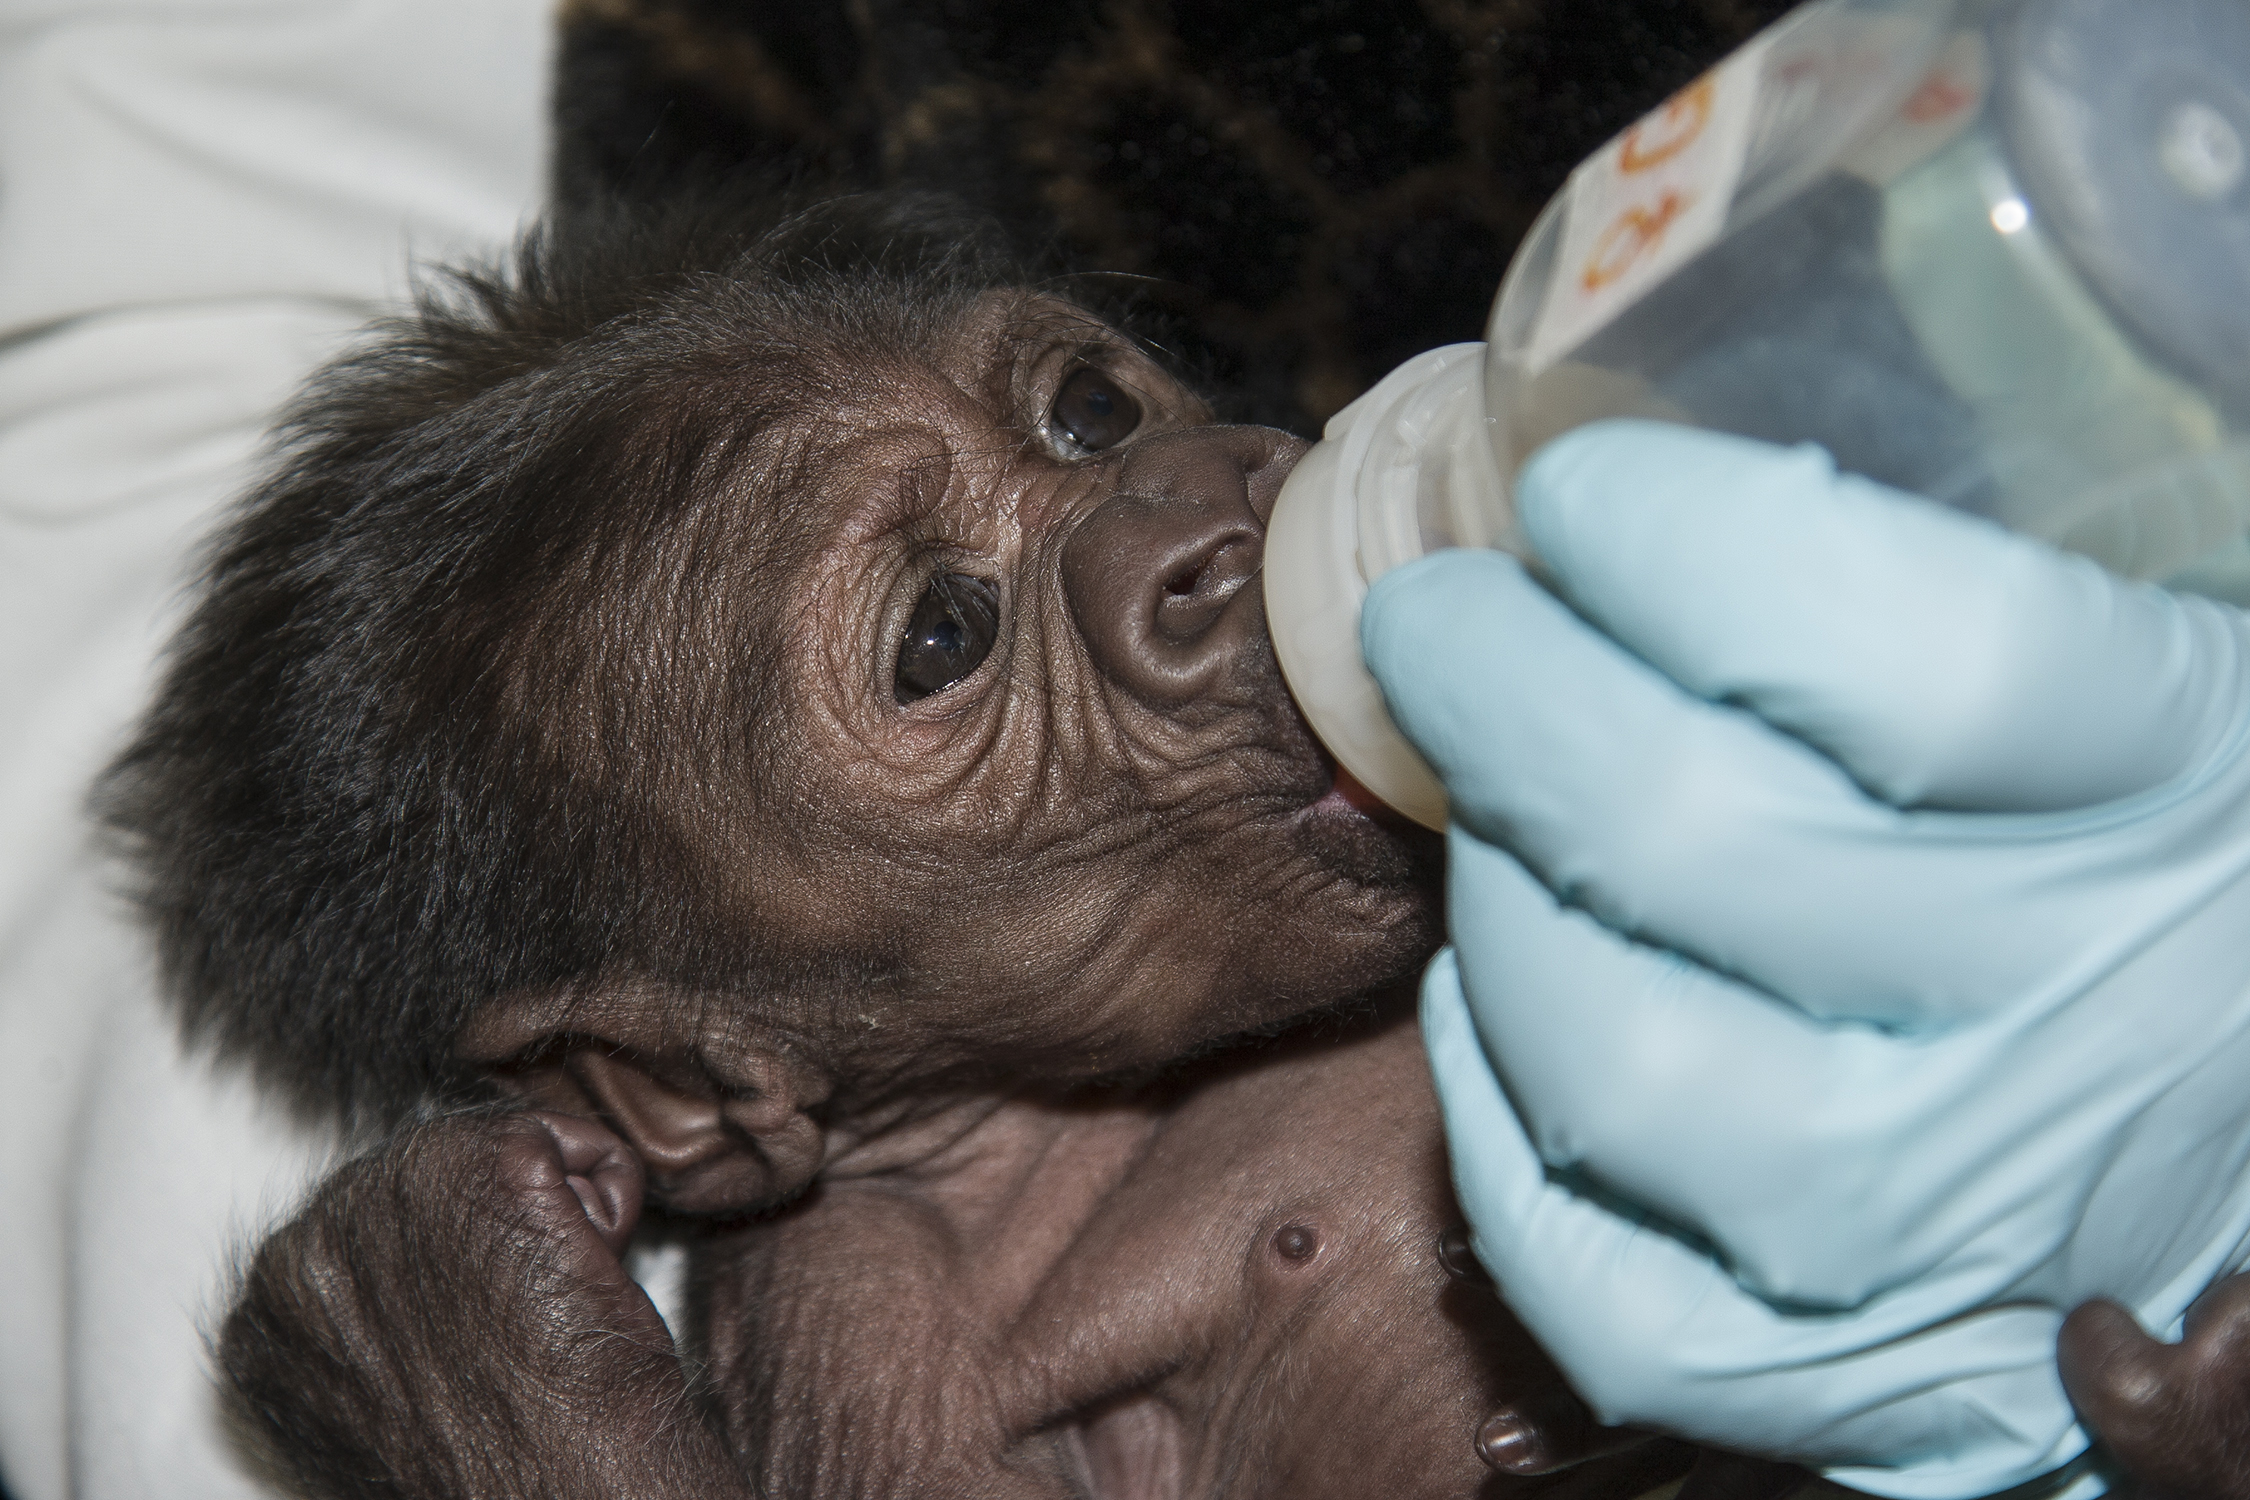 PHOTO: The 8-day-old gorilla at San Diego Zoo Safari Park is showing great improvement after a rare c-section birth: she is now strong enough to breathe on her own, and veterinary staff were able to start giving the gorilla bottles with a milk formula.